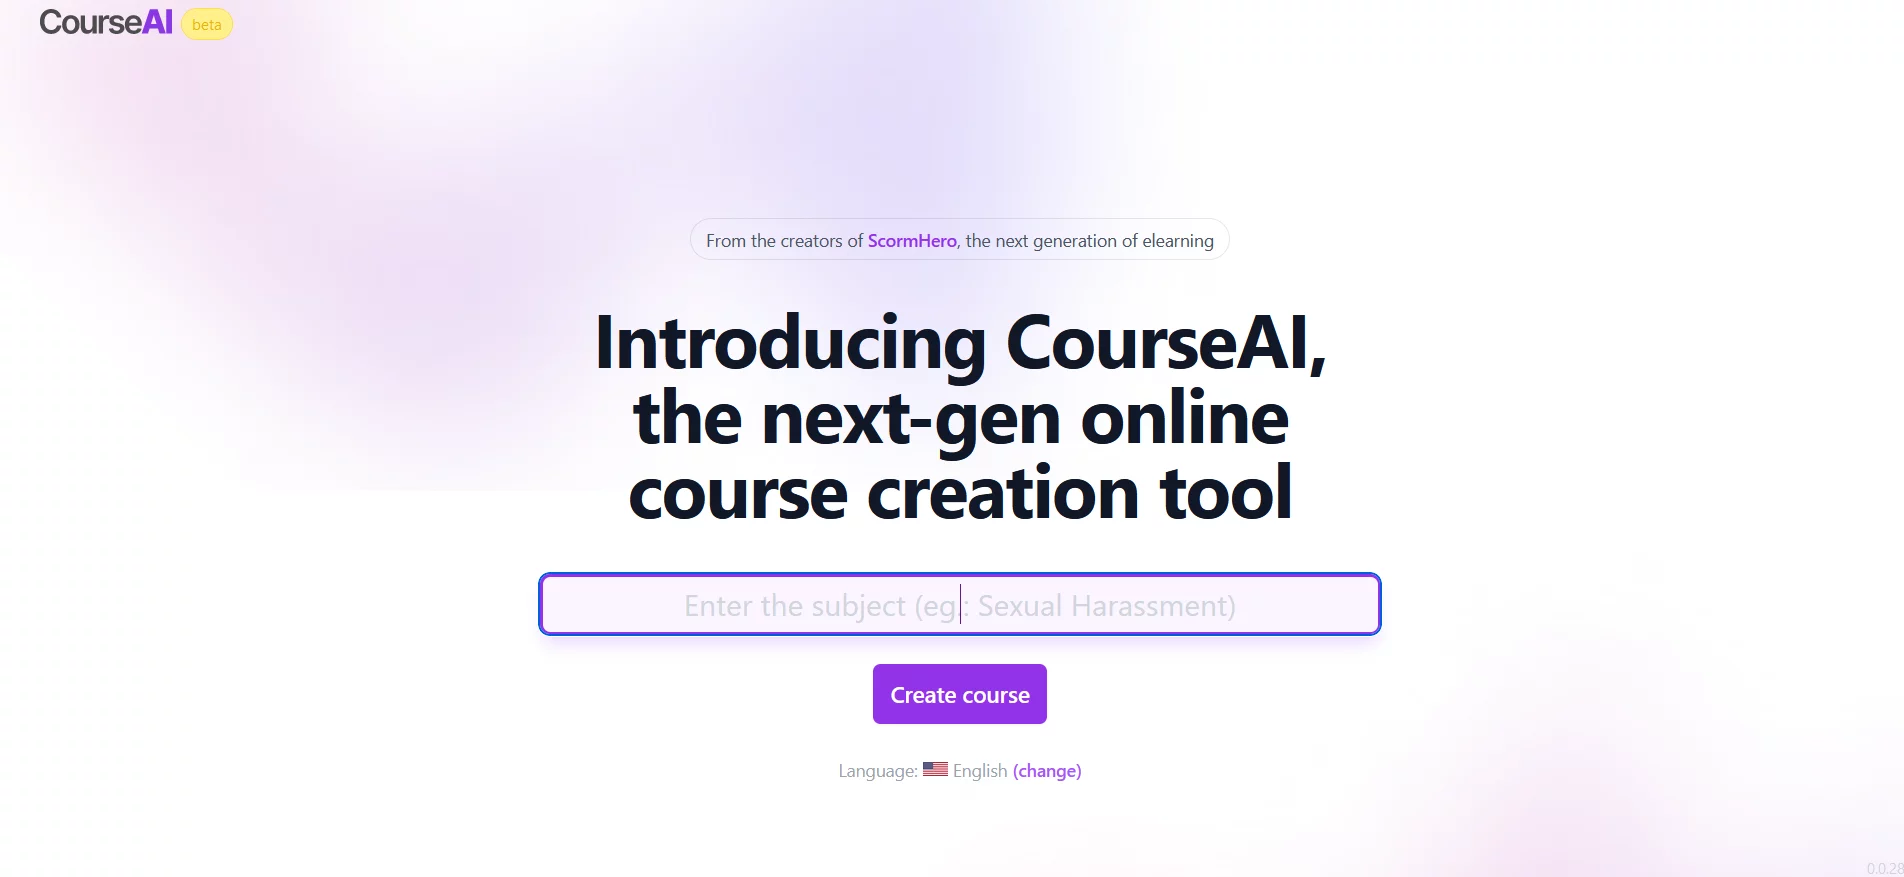  The next-gen online course creation tool